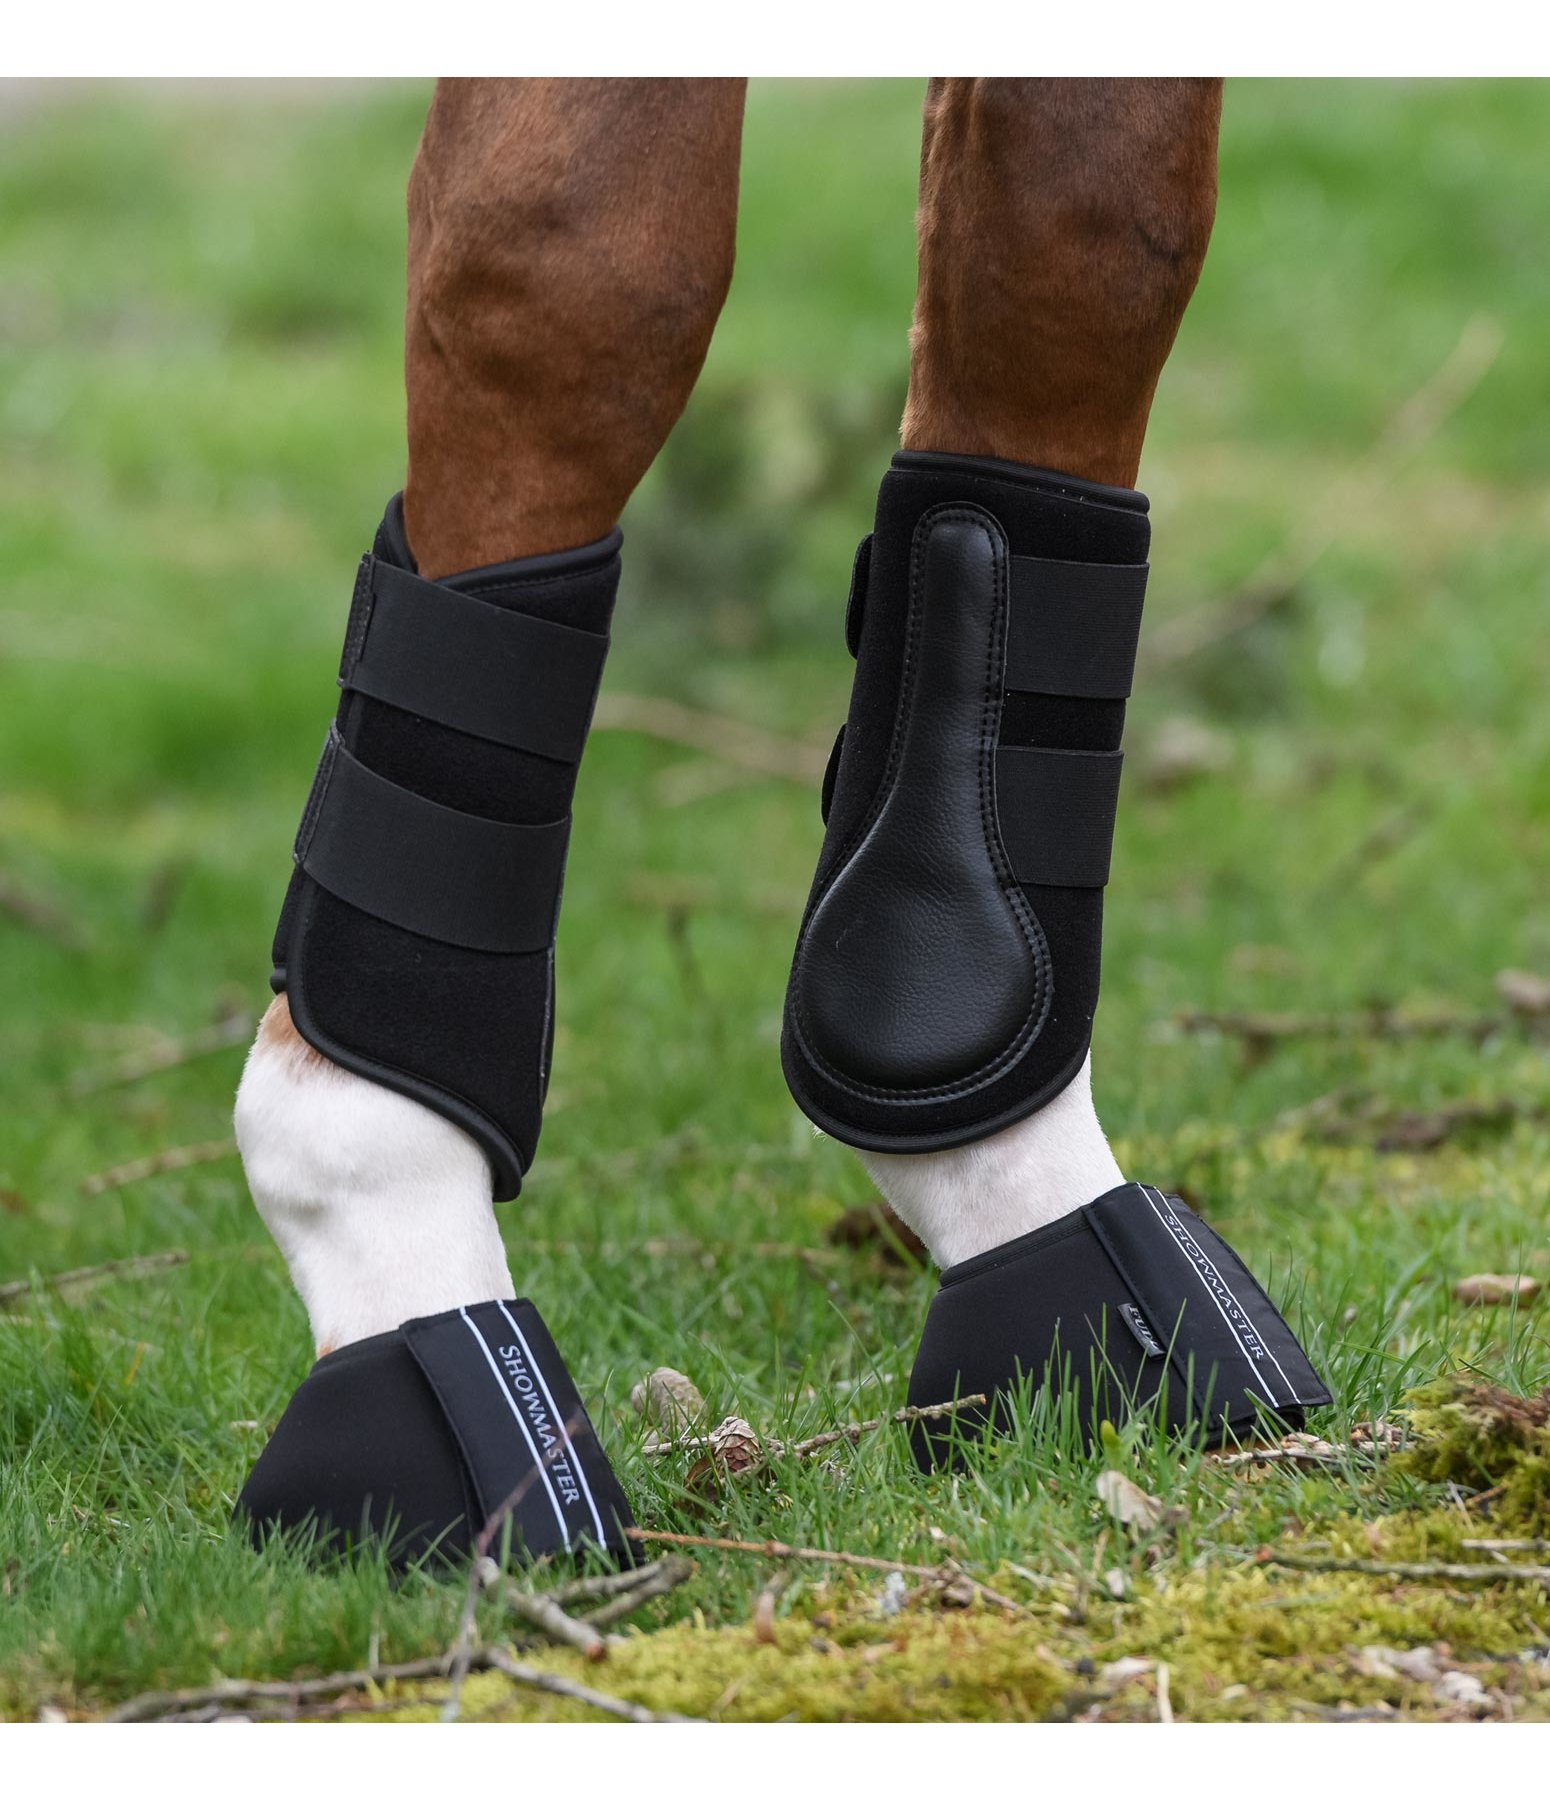 All-Day Training Boots, front legs